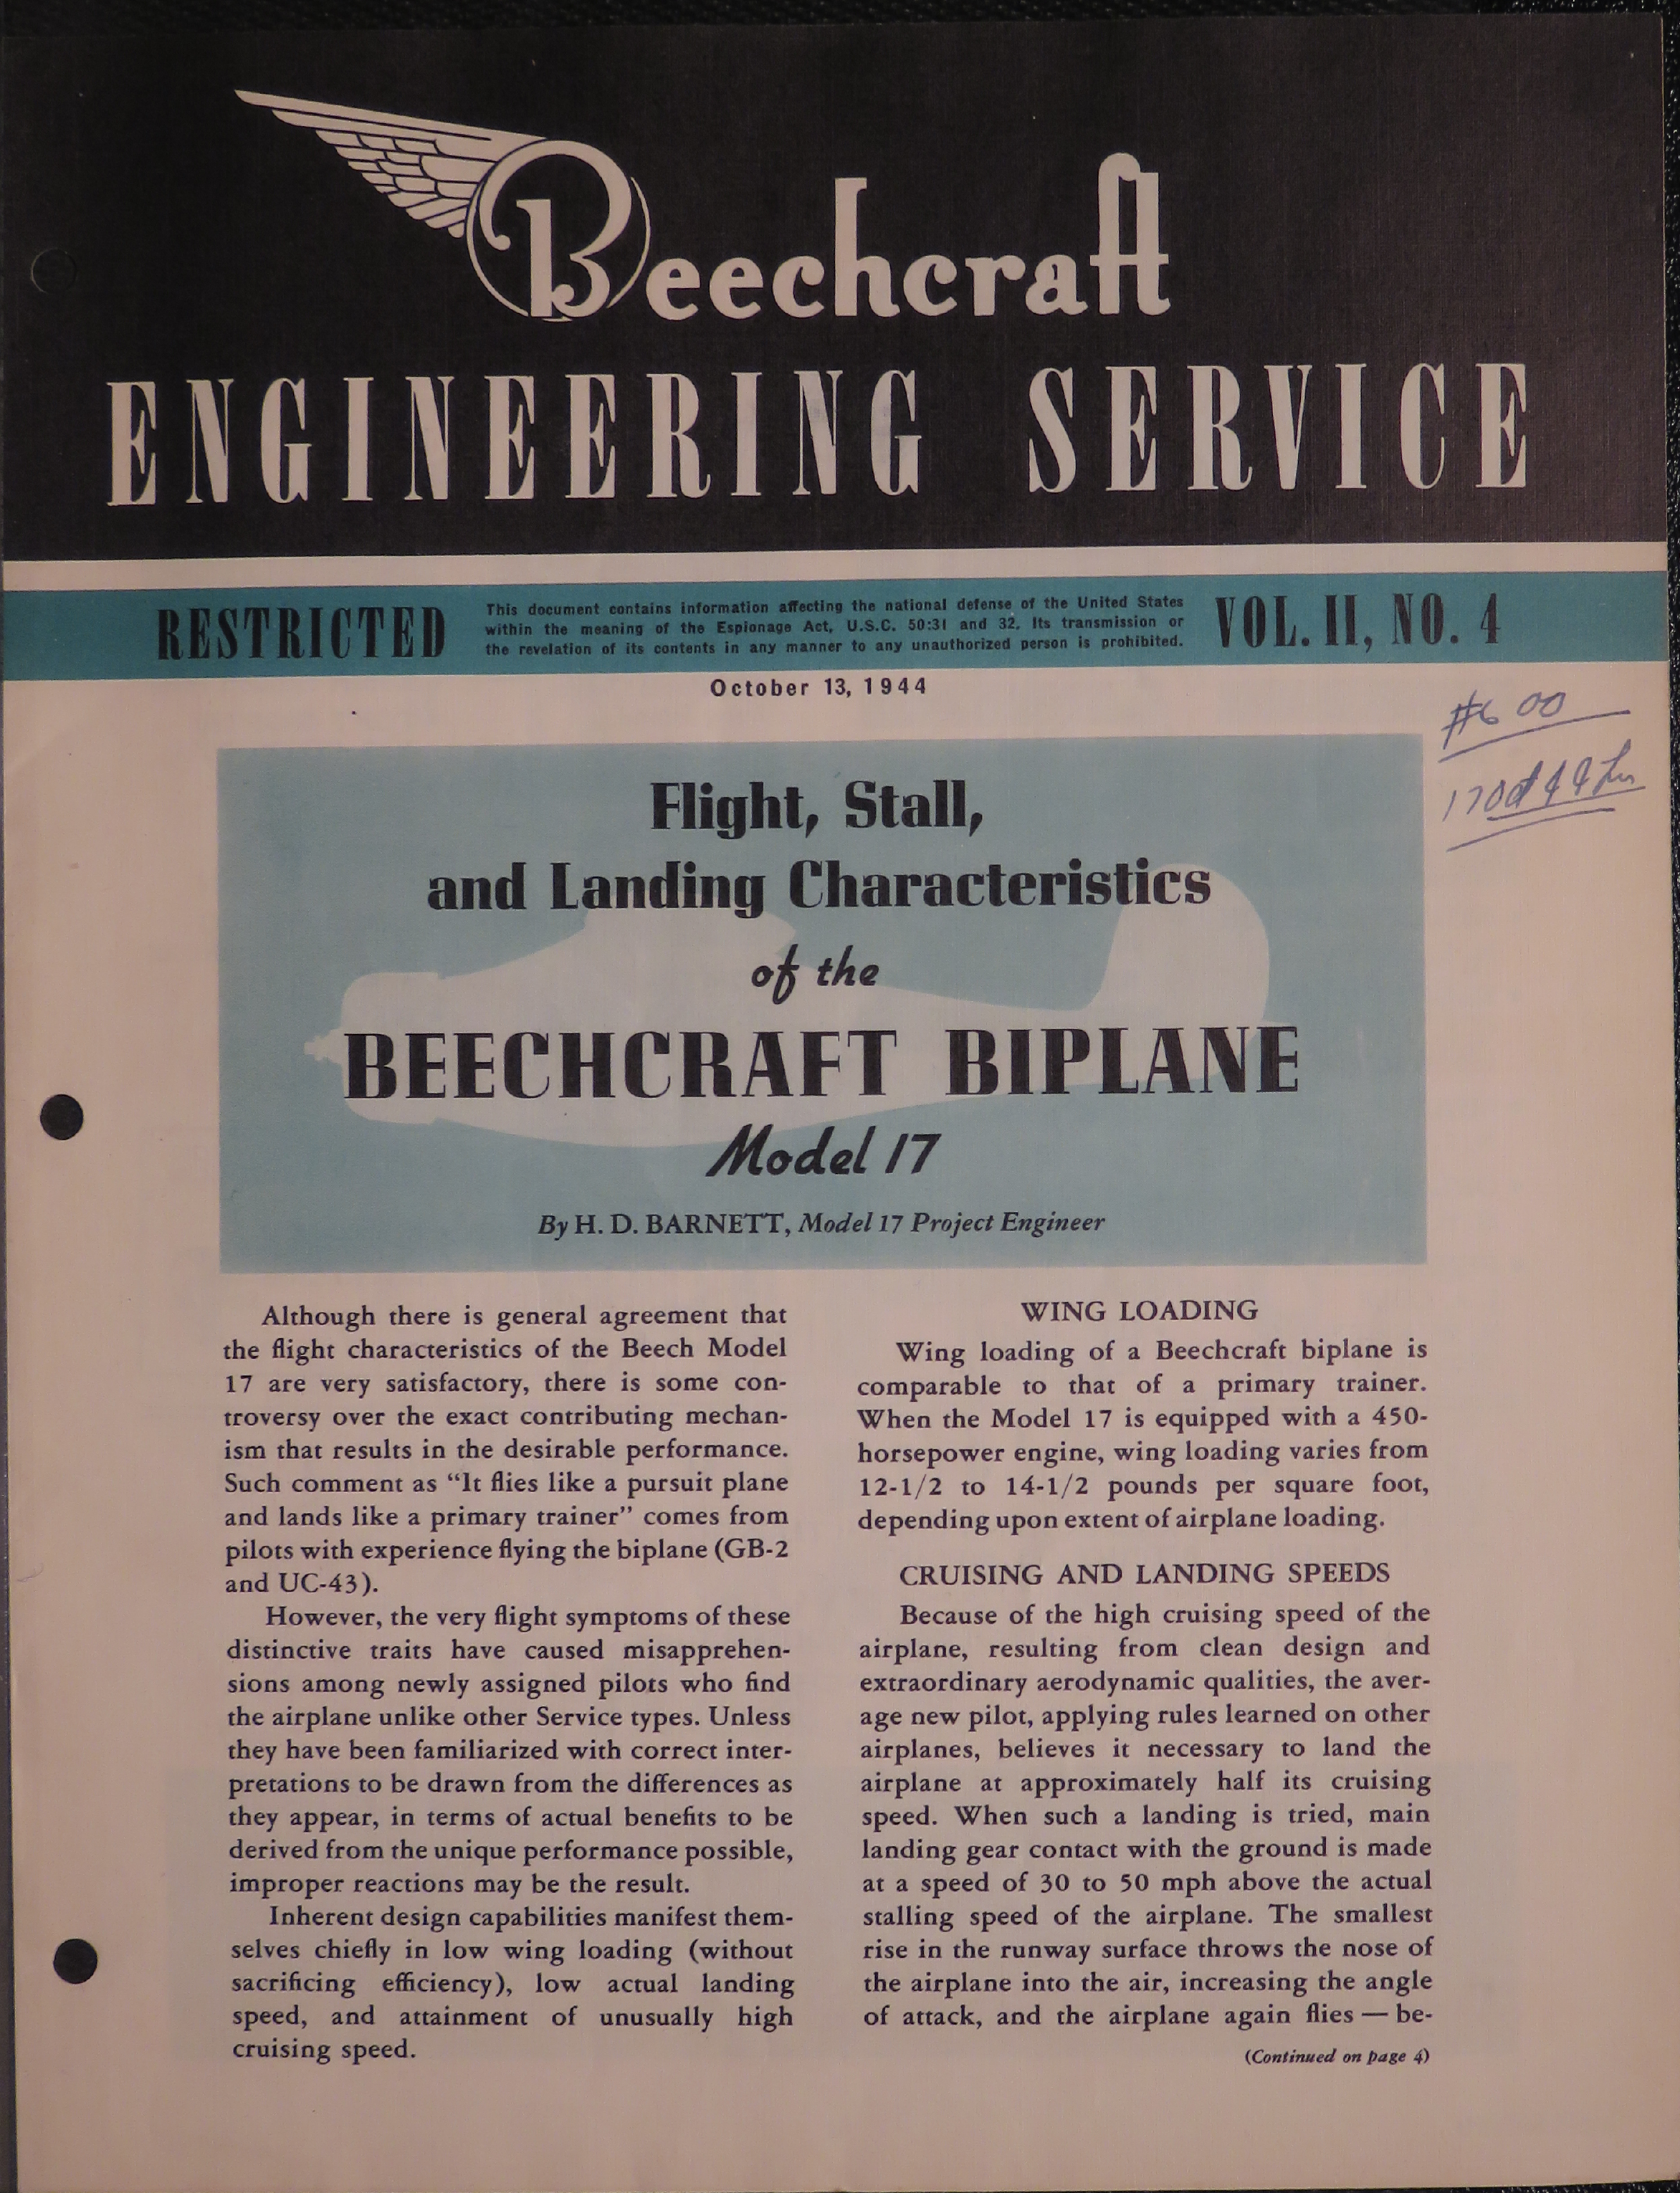 Sample page 1 from AirCorps Library document: Vol. II, No. 4 - Beechcraft Engineering Service